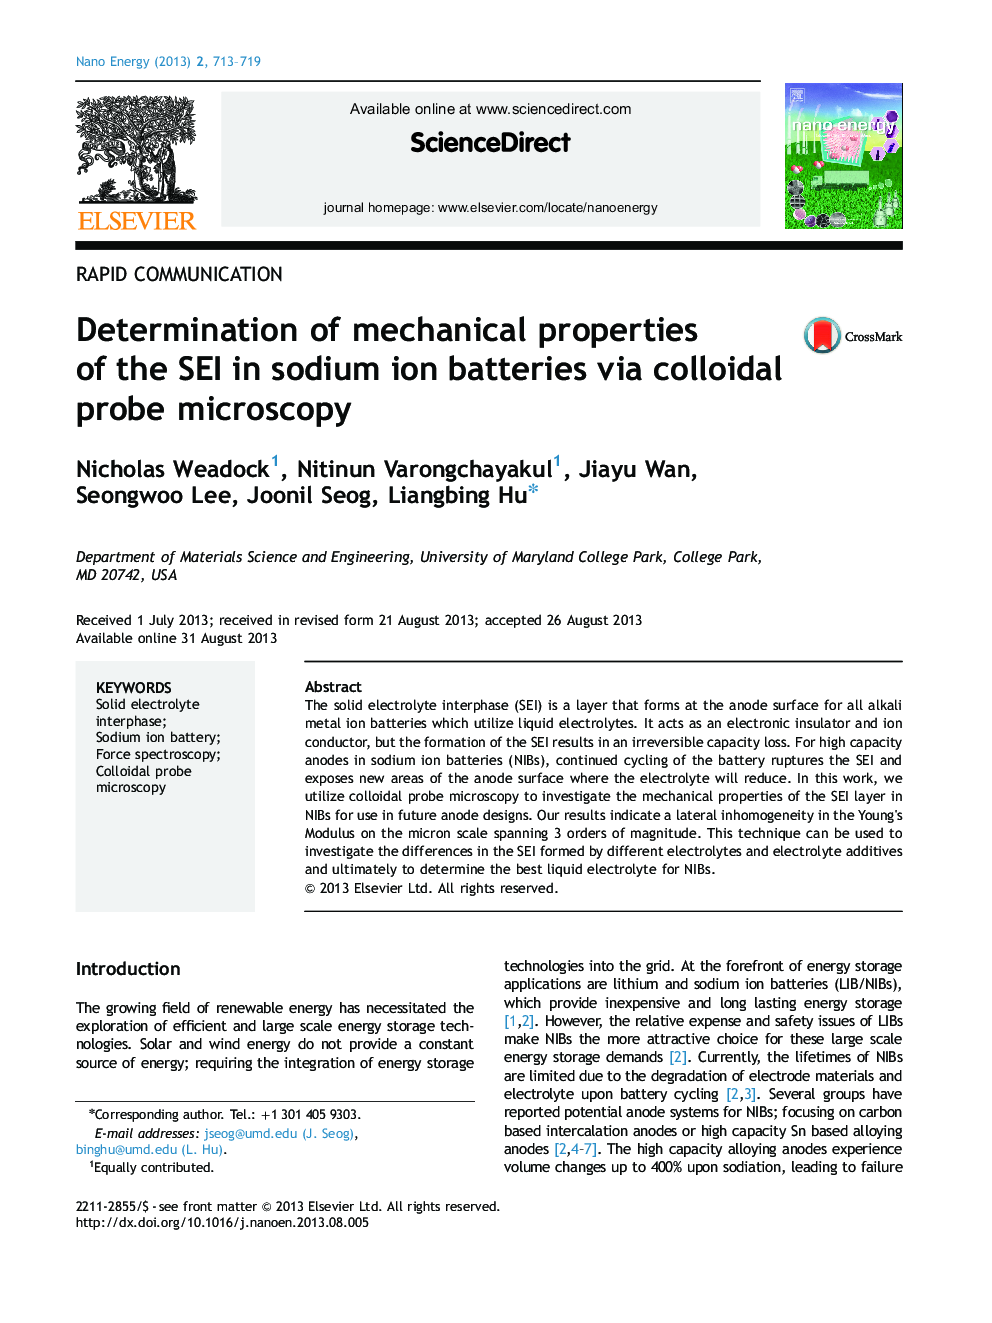 Determination of mechanical properties of the SEI in sodium ion batteries via colloidal probe microscopy